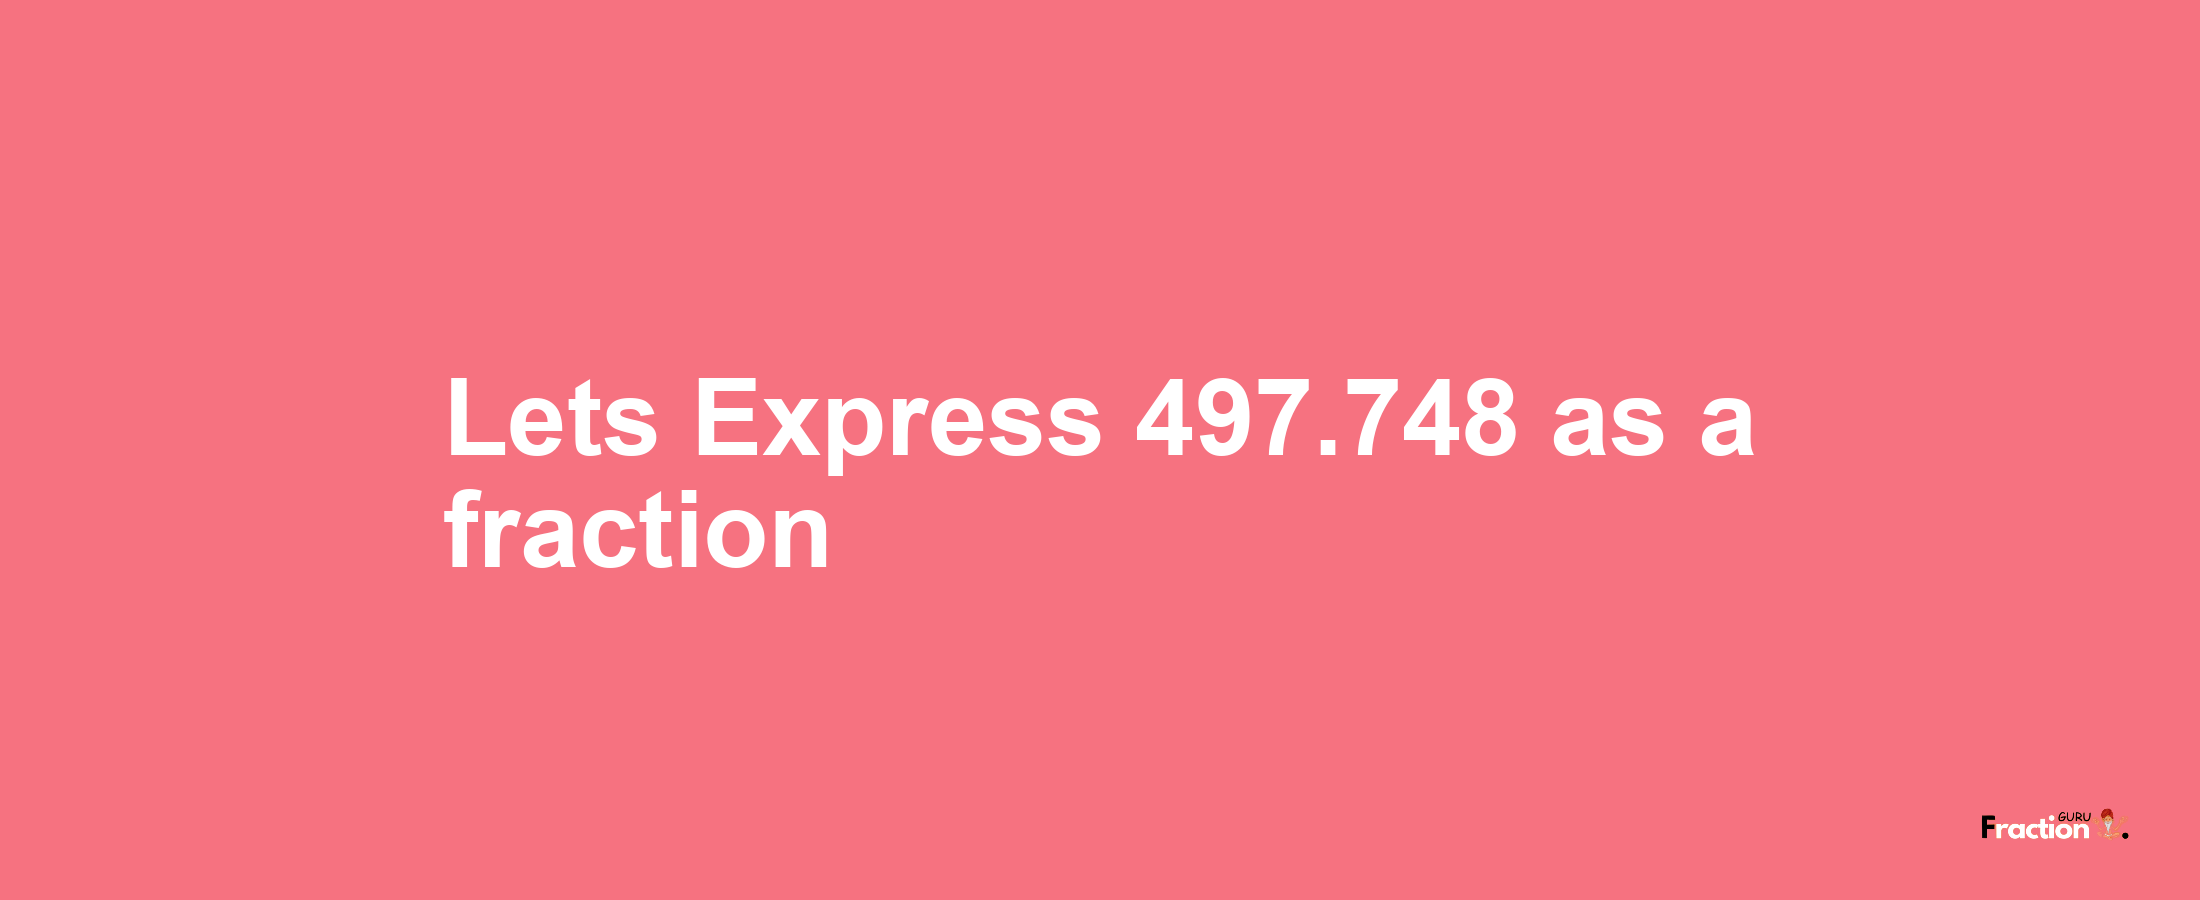 Lets Express 497.748 as afraction